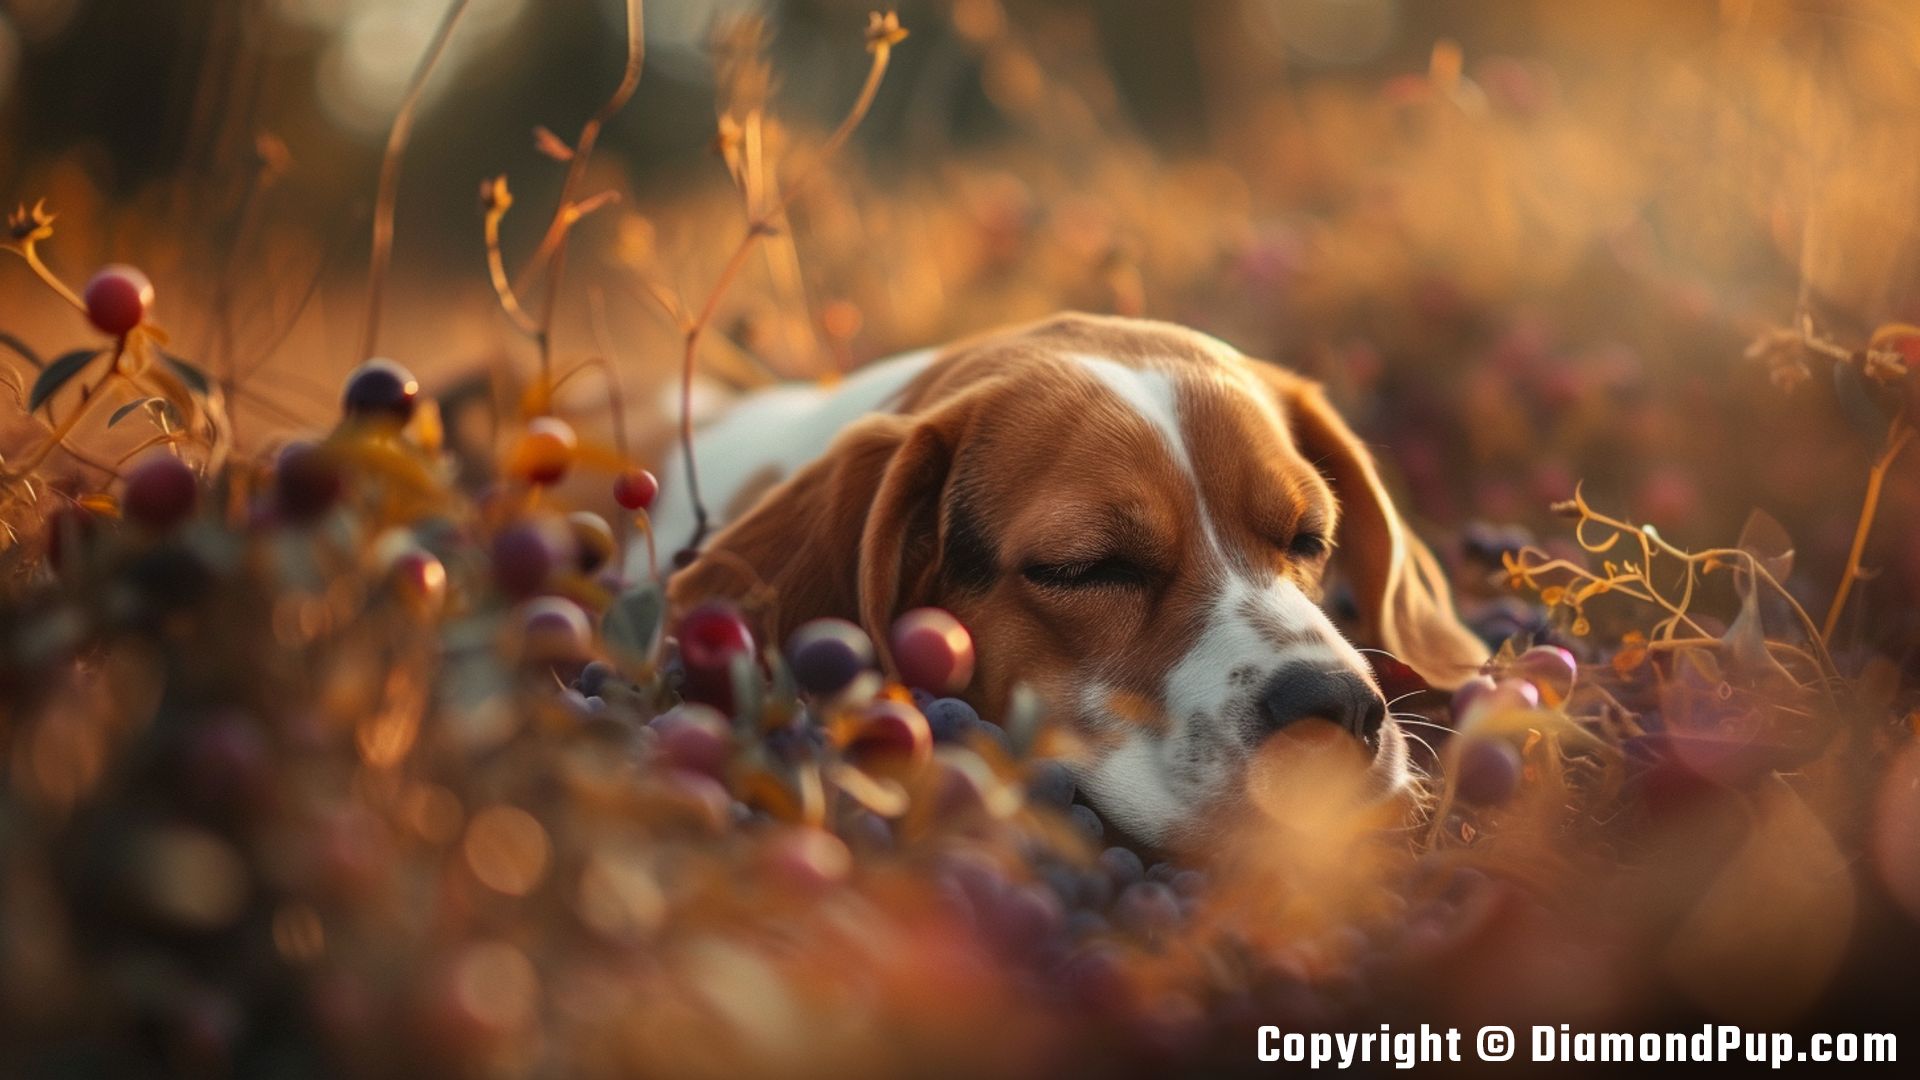 Image of a Playful Beagle Eating Blueberries